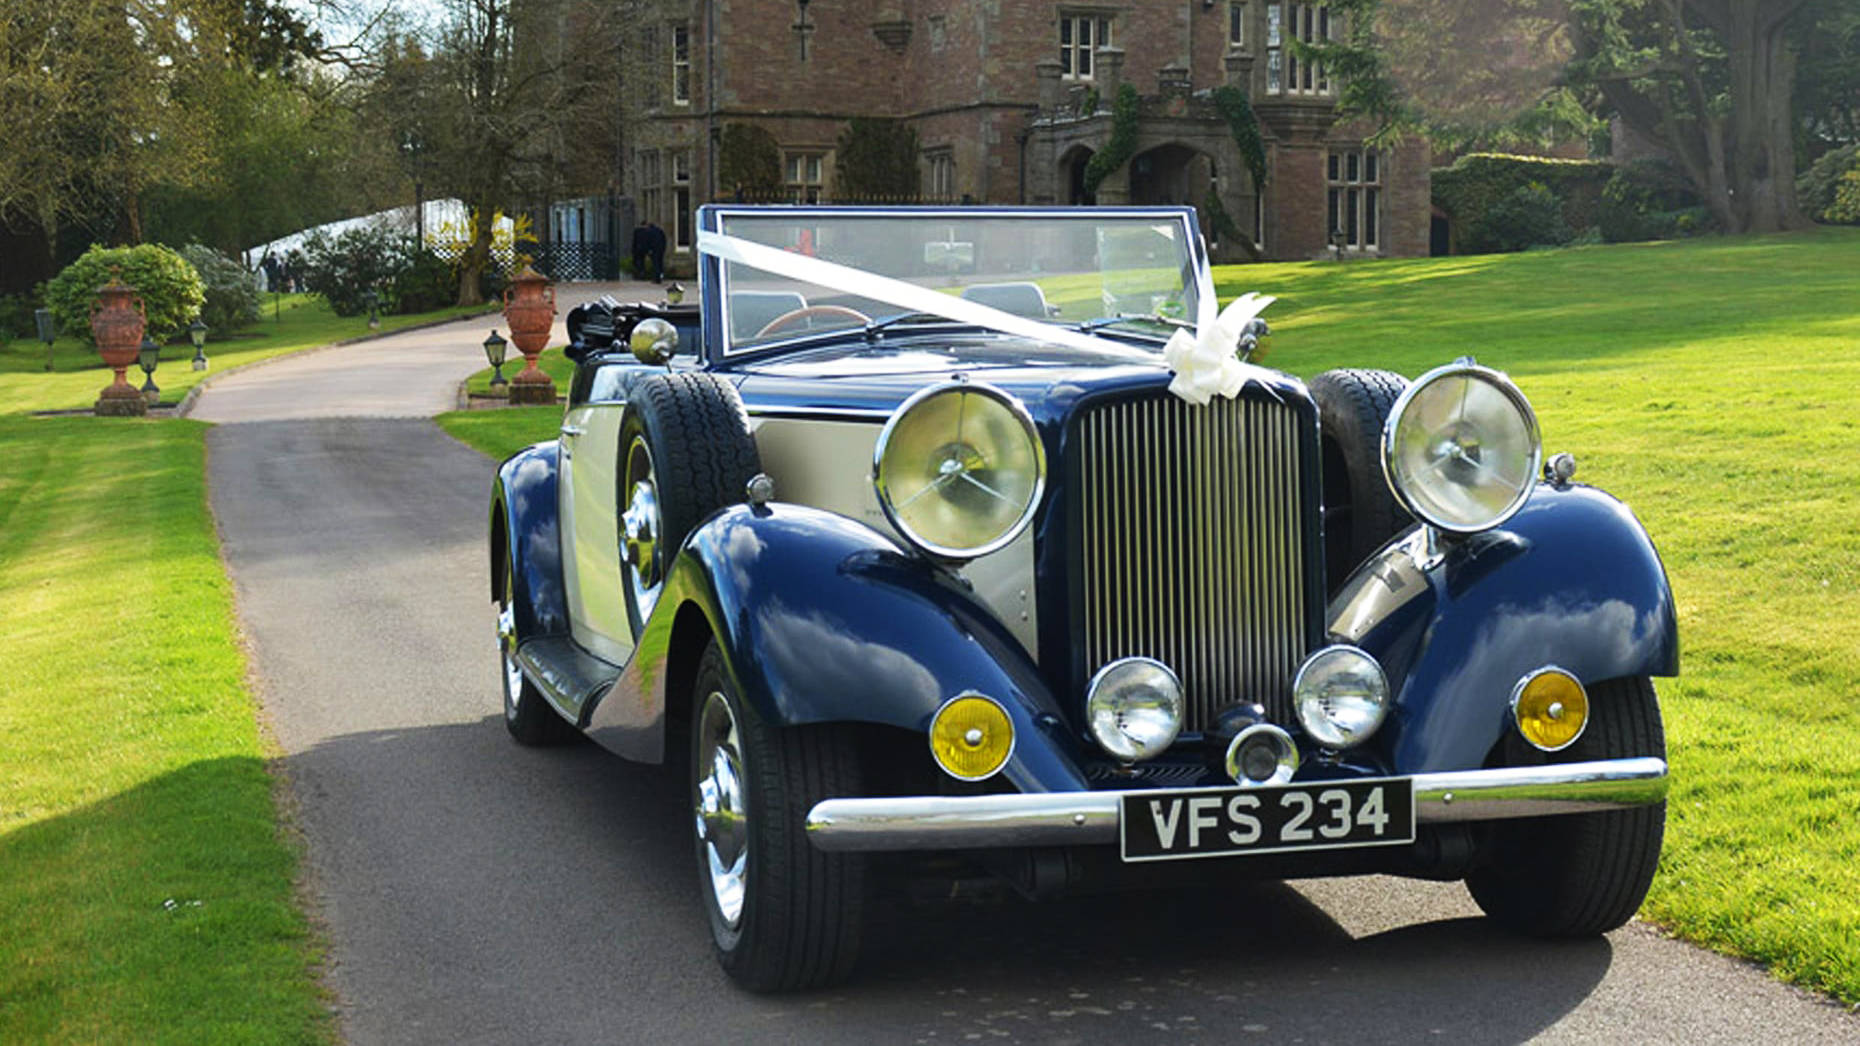 Blue and Ivory vintage Jaguar Drophead on the driveway of a local wedding venue inNarborough.